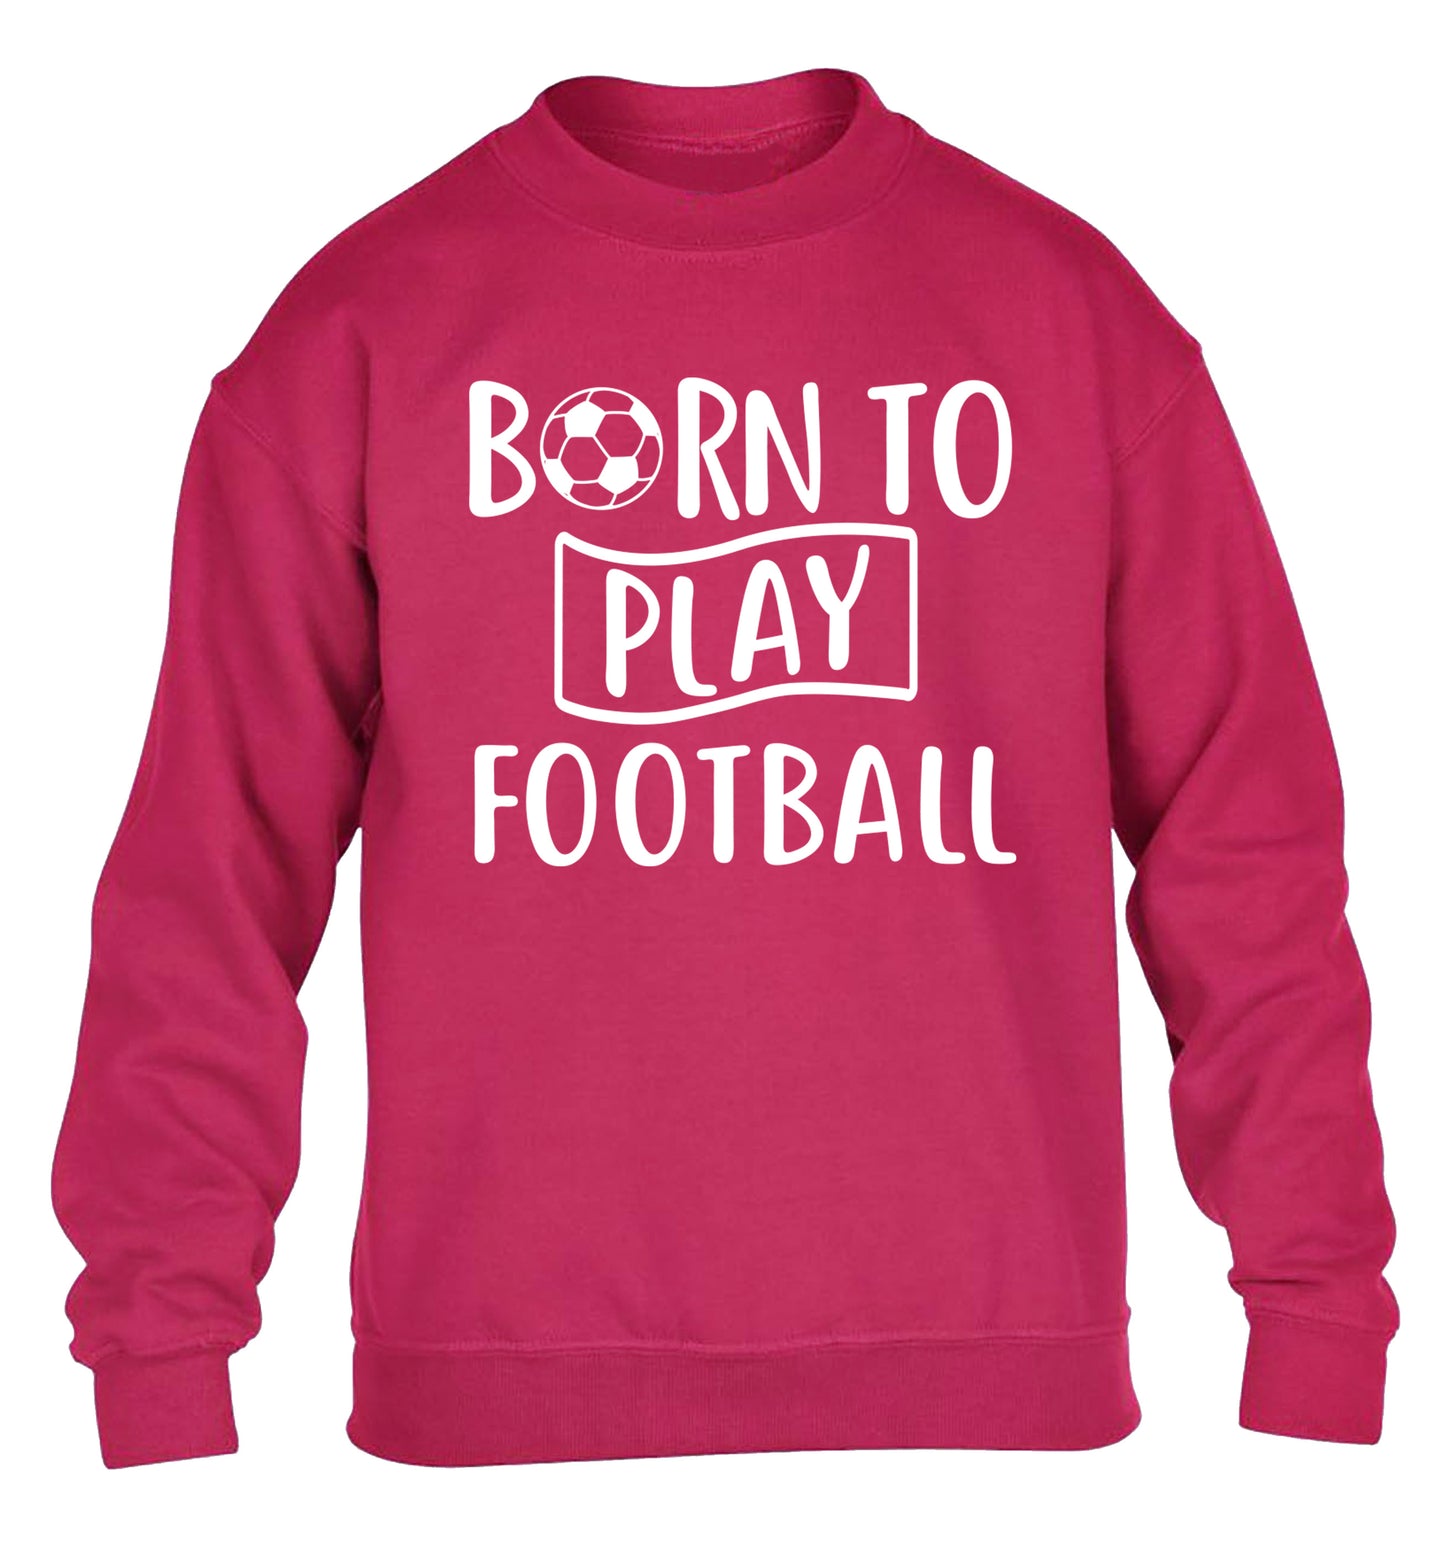 Born to play football children's pink sweater 12-14 Years